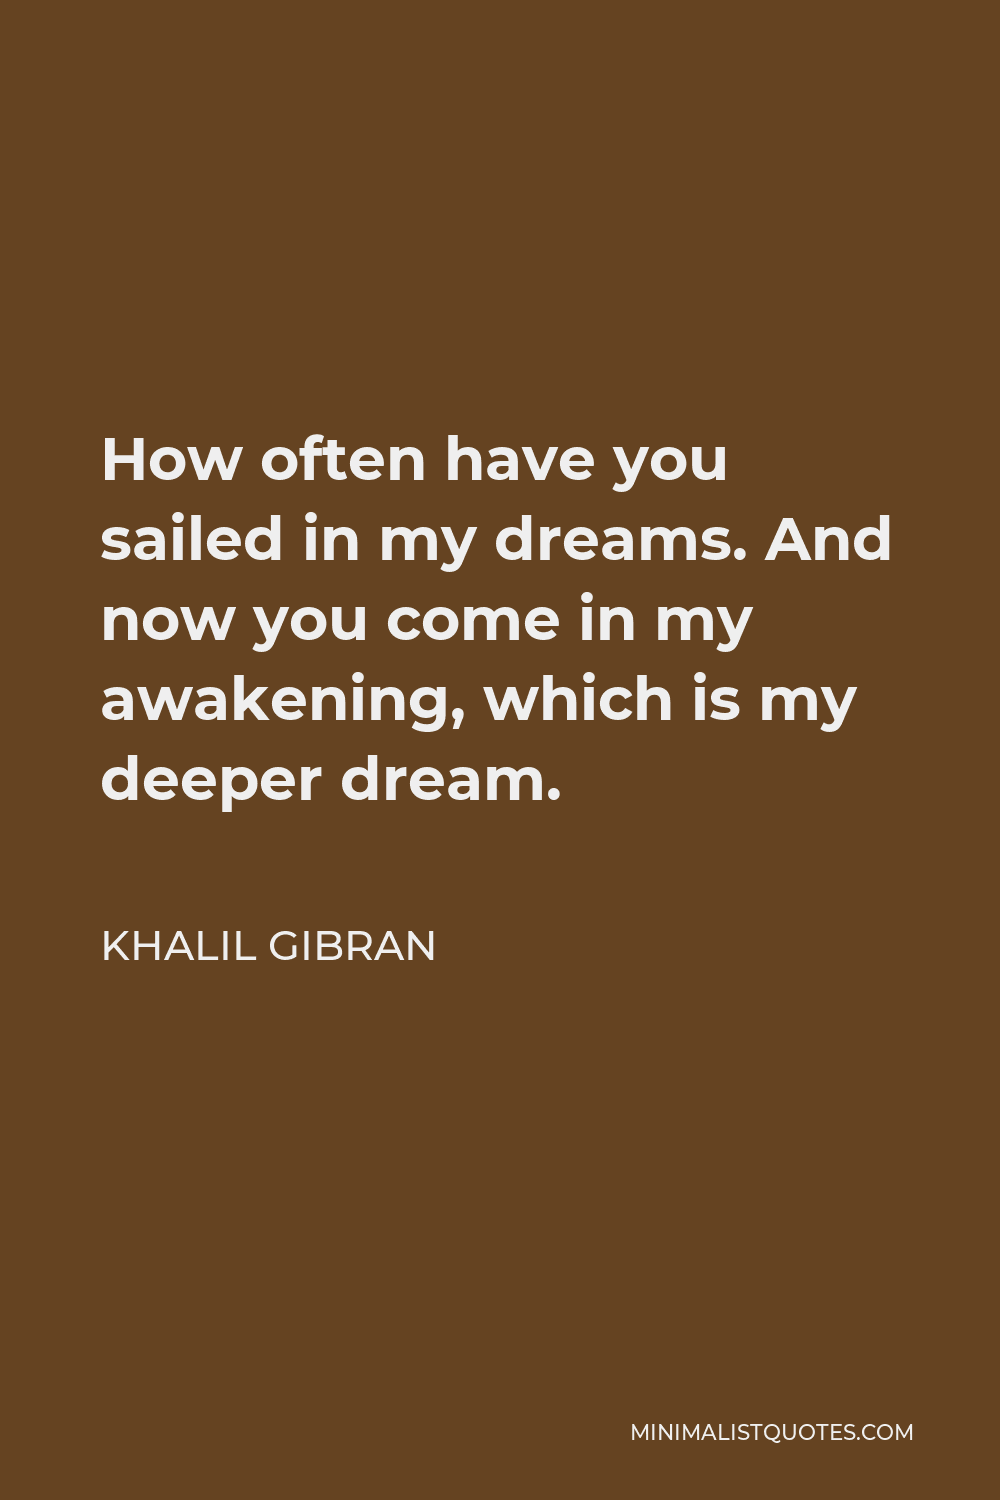 Khalil Gibran Quote - How often have you sailed in my dreams. And now you come in my awakening, which is my deeper dream.